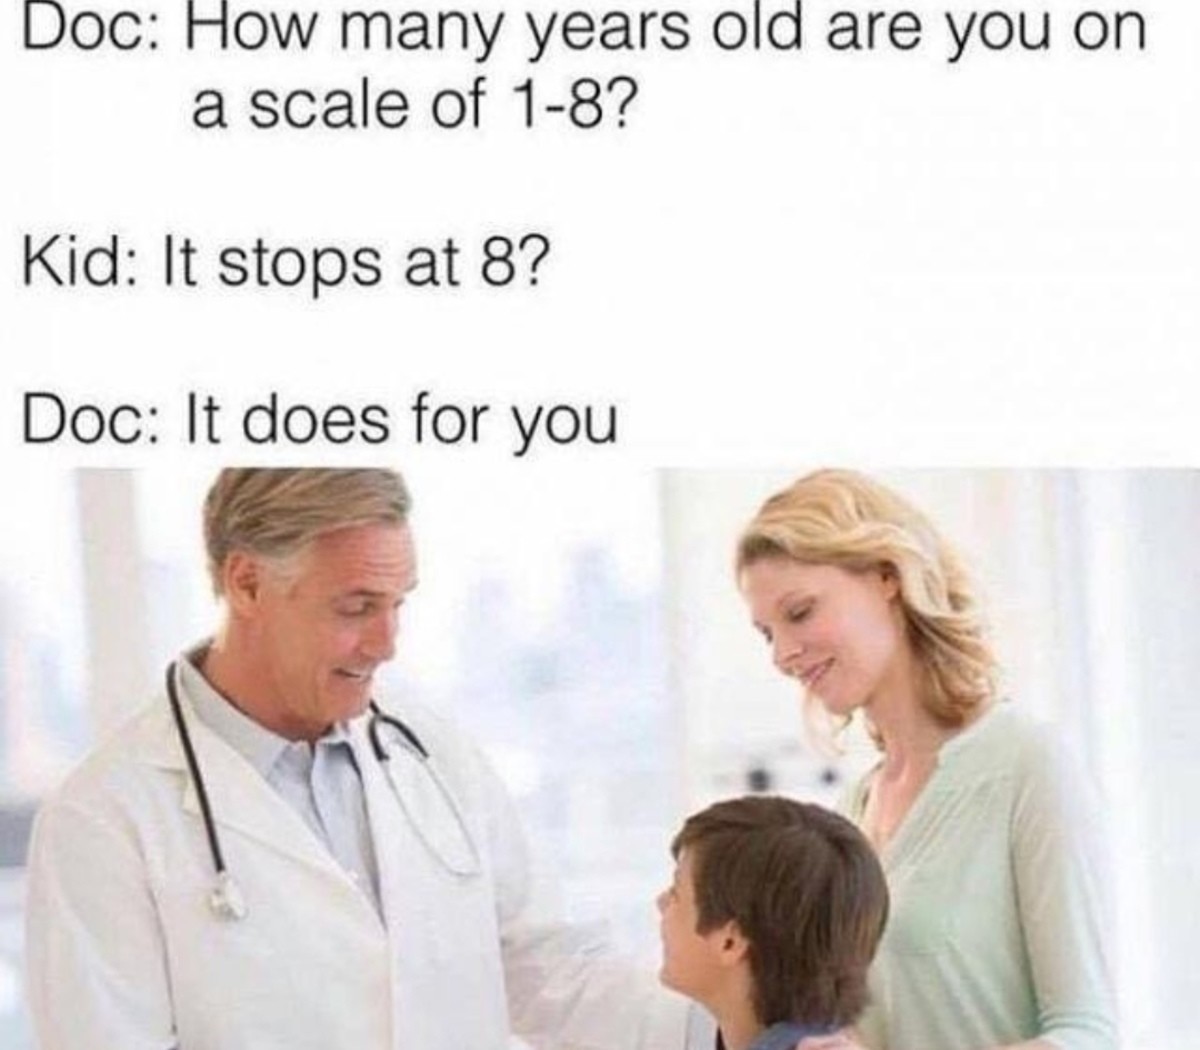 medical meme - medical memes - Doc How many years old are you on a scale of 18? Kid It stops at 8? Doc It does for you